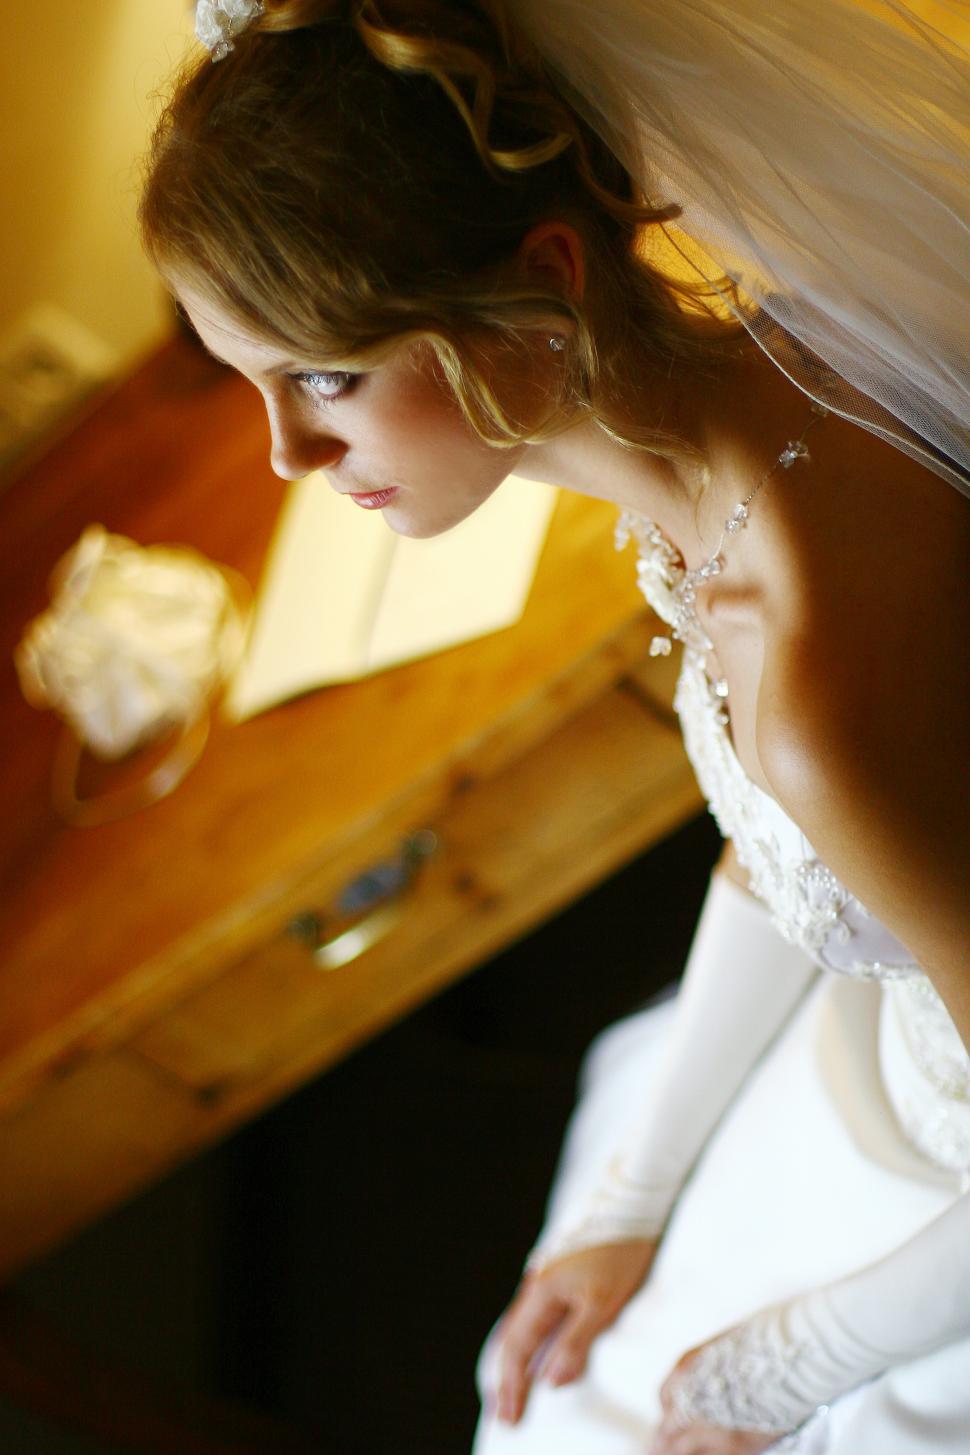 Free Image of young bride waiting for ceremony 